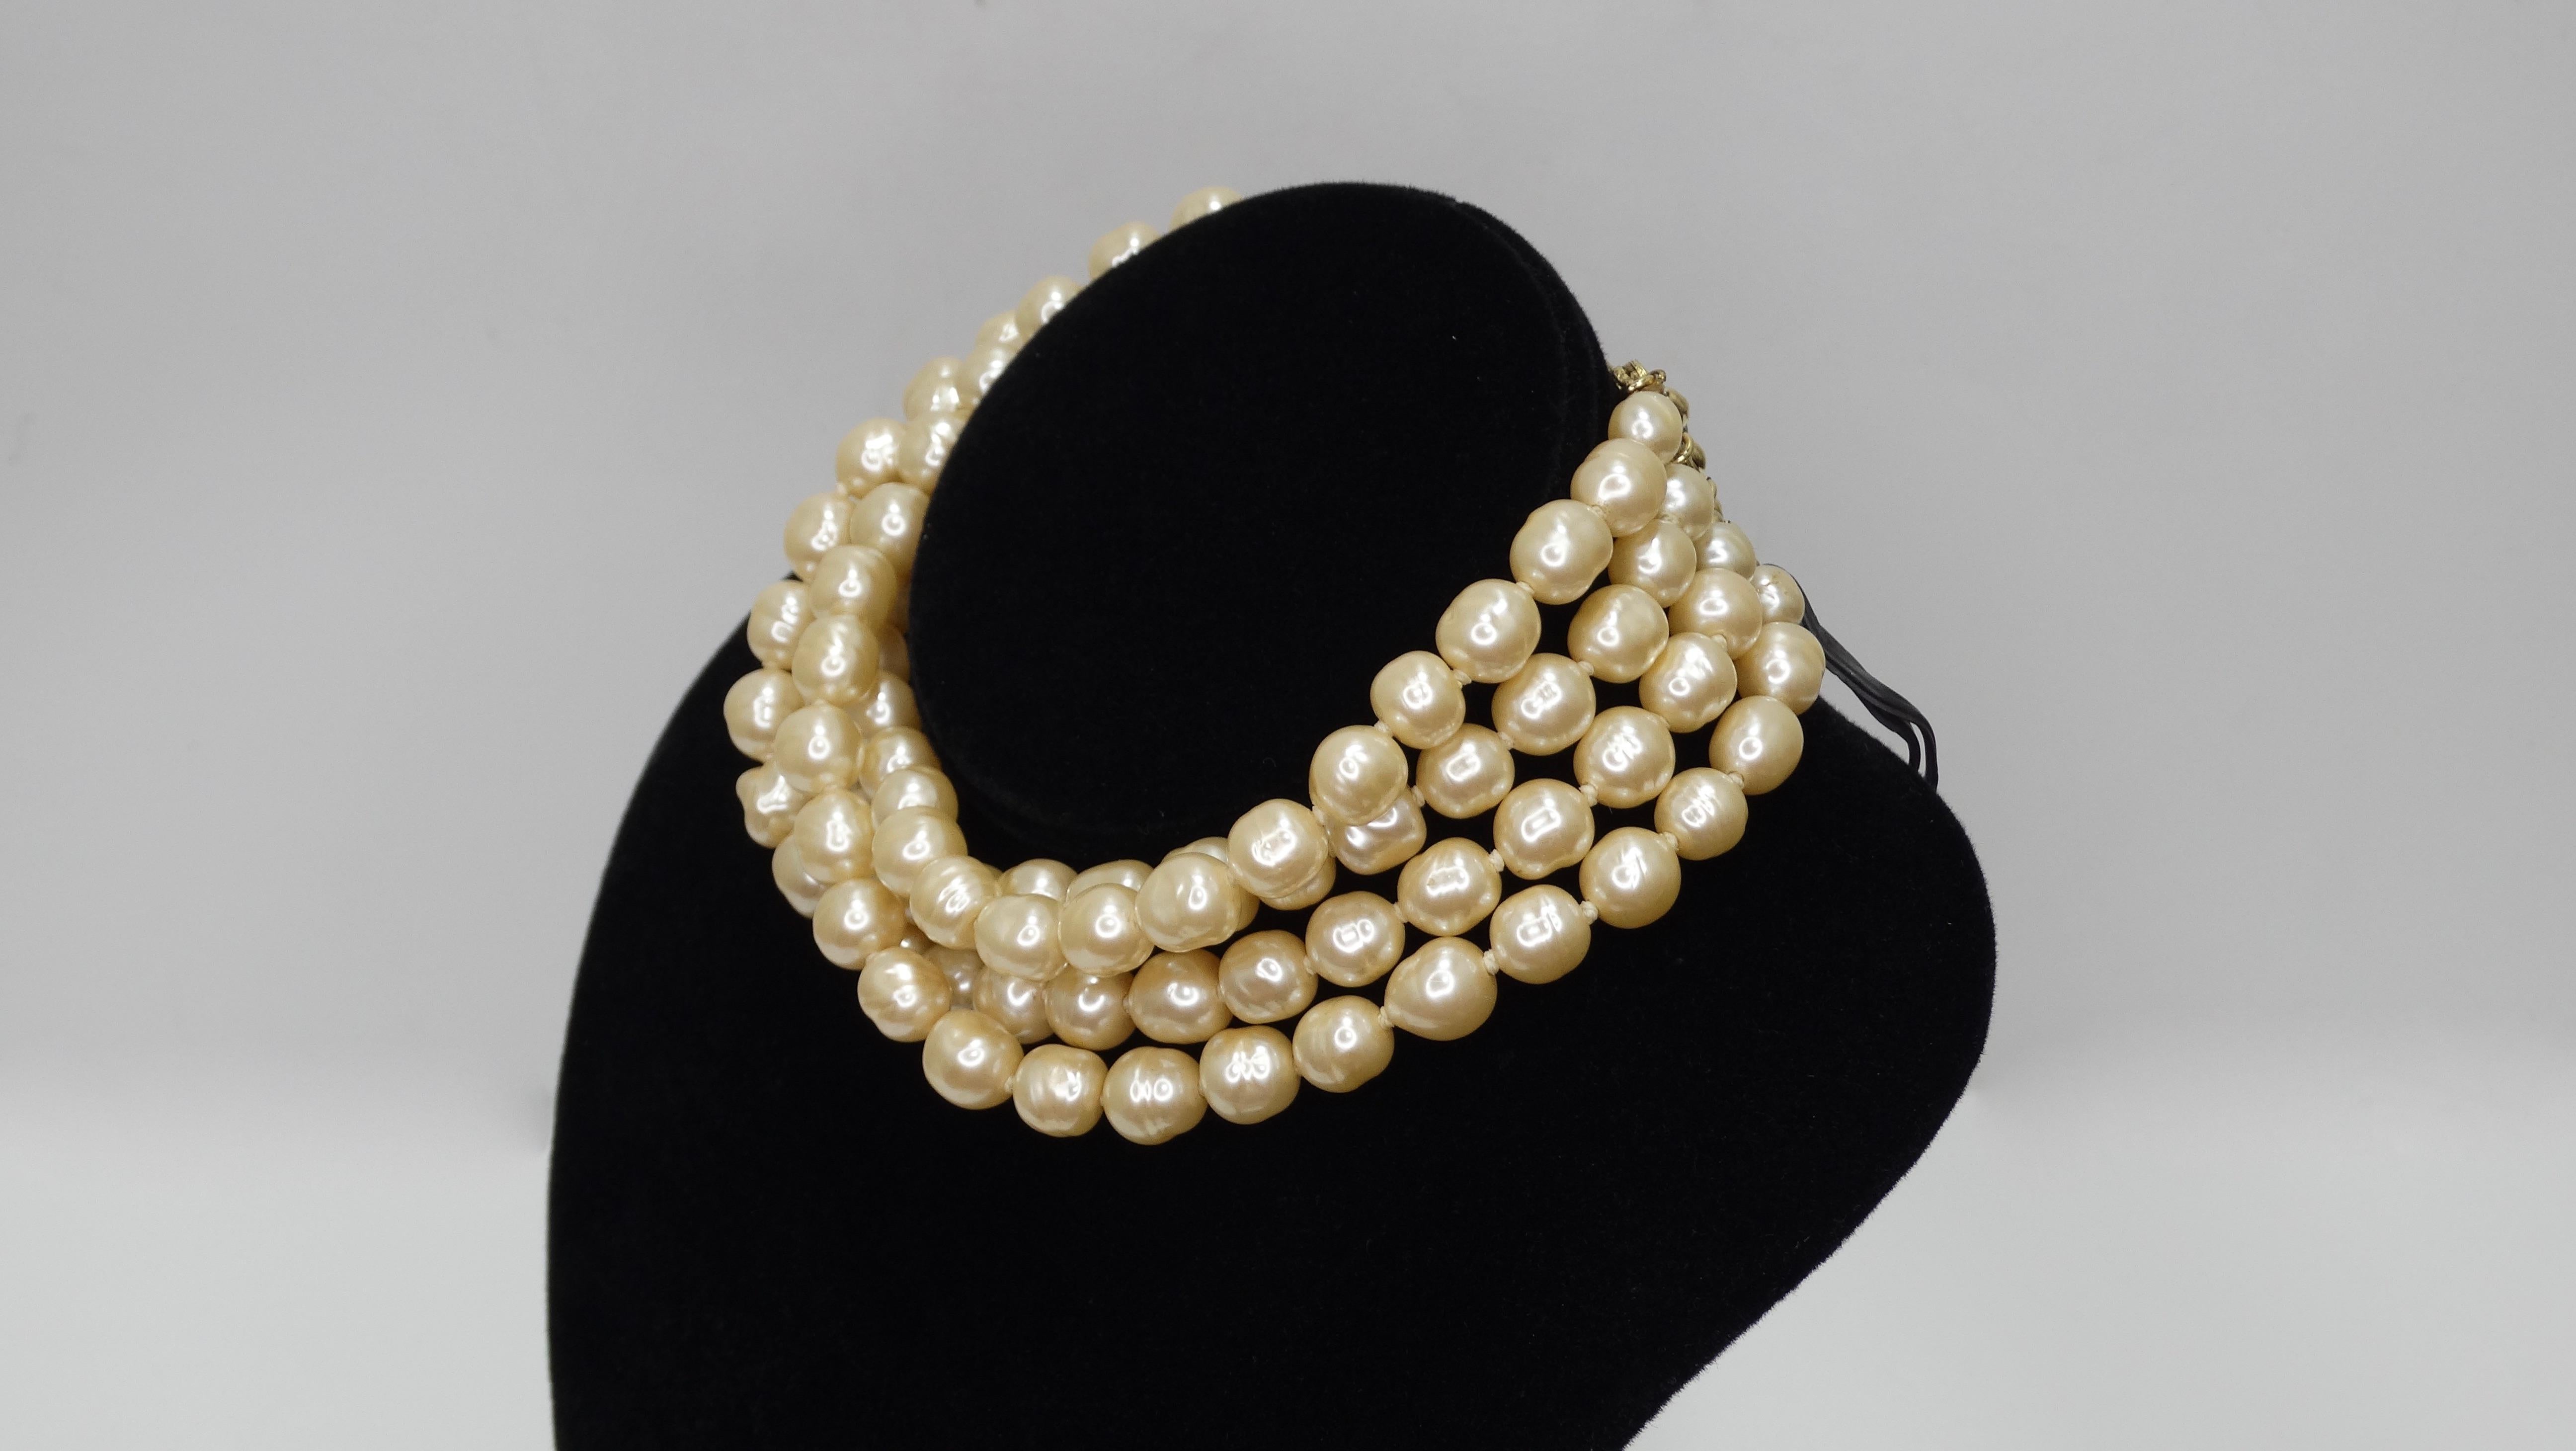 It doesn't get anymore classic than this stunning Chanel choker! Circa 1981, this choker features multi-strands of faux pearls with baroque style gold plated accents and a hook closure. Timeless and chic, this necklace will pair perfectly with your